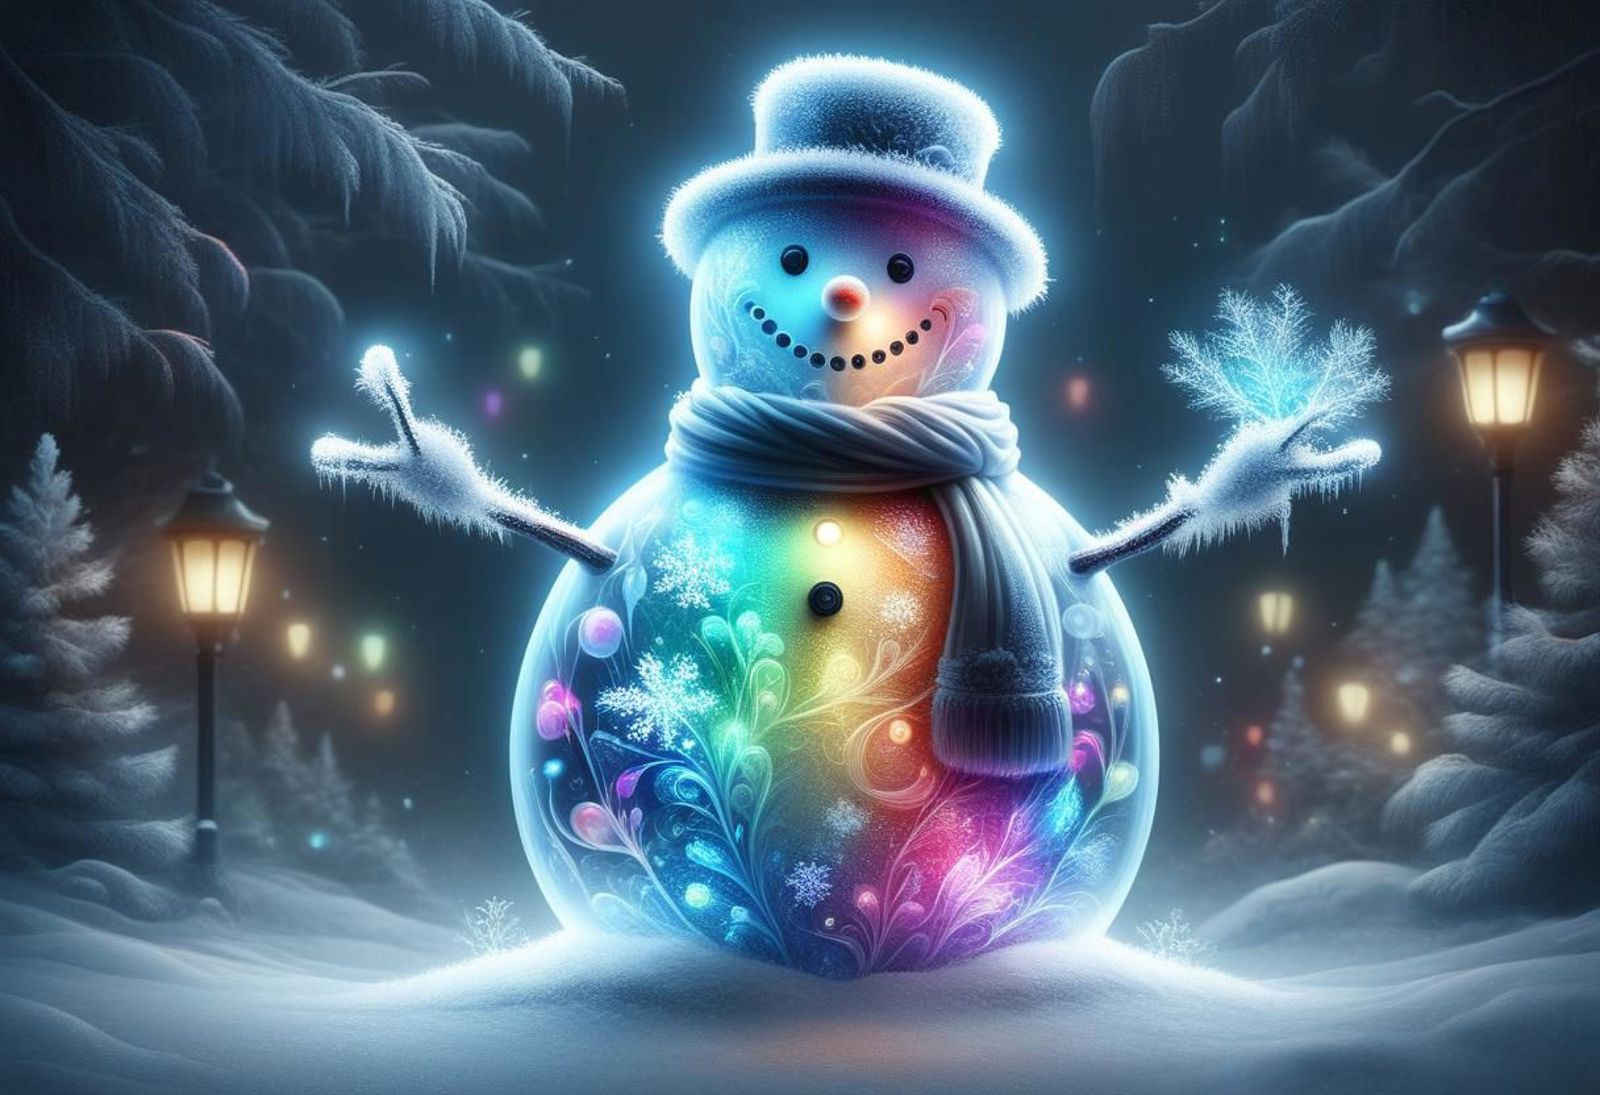 A colorful snowman with a scarf and top hat in a snowy landscape.